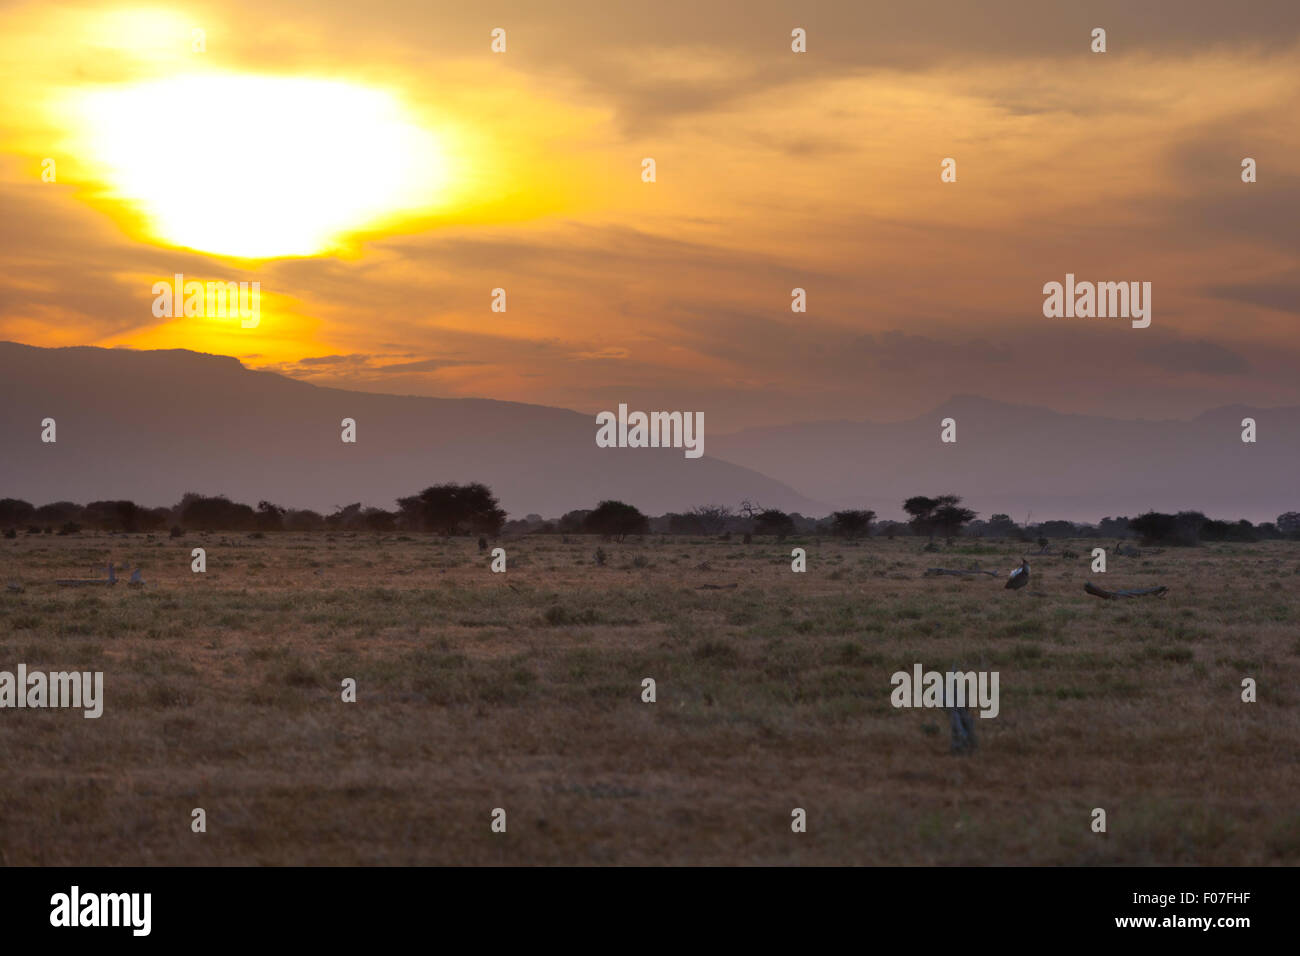 Sunset and landscape in Tsavo East National Park in Kenya with a safari car passing. Stock Photo